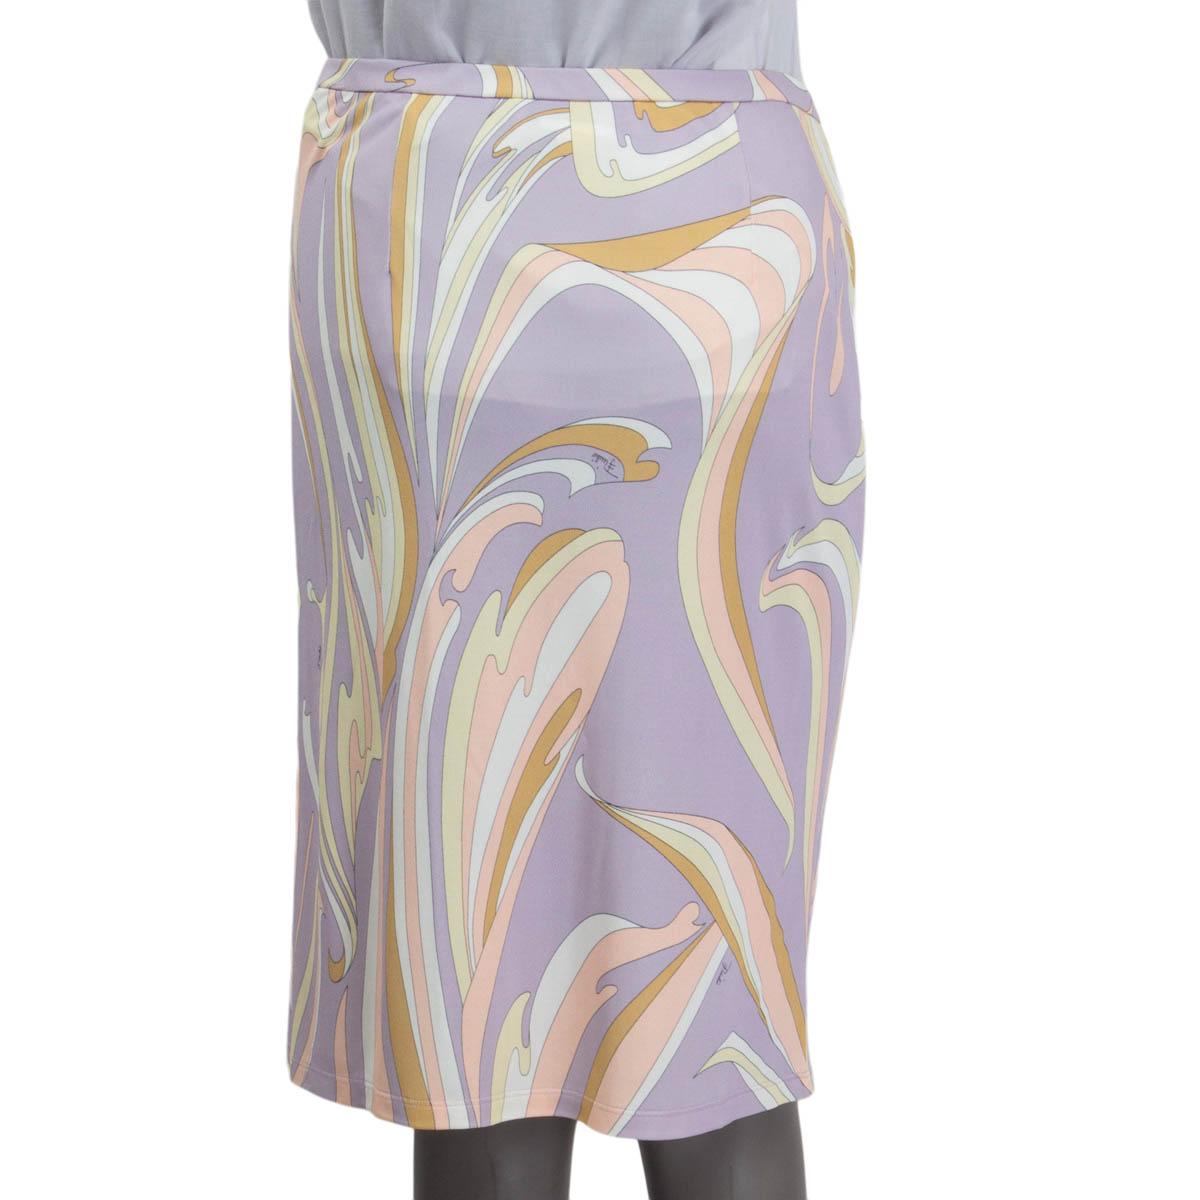 100% authentic Emilio Pucci knee length classic printed skirt in pale lilac, pale salmon, white and vanilla viscose (88%) and silk (12%) (Missing Tag) with an elastic waist band. Has been worn and is in excellent condition. 

Matching top available